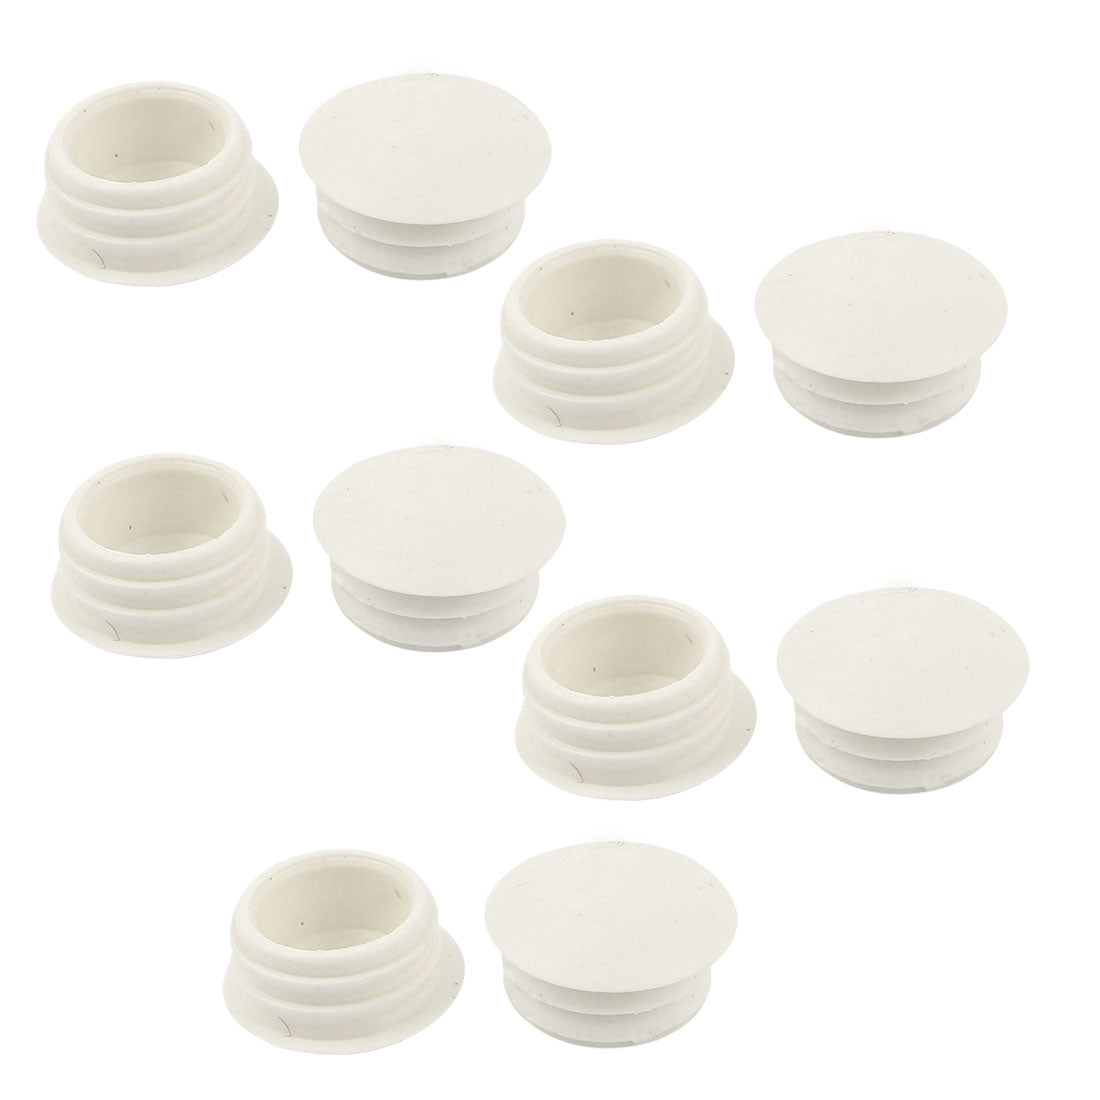 uxcell Uxcell 10 Pcs 13mm Dia Round Shape Plastic Blanking End Cap Tubing Tube Insert